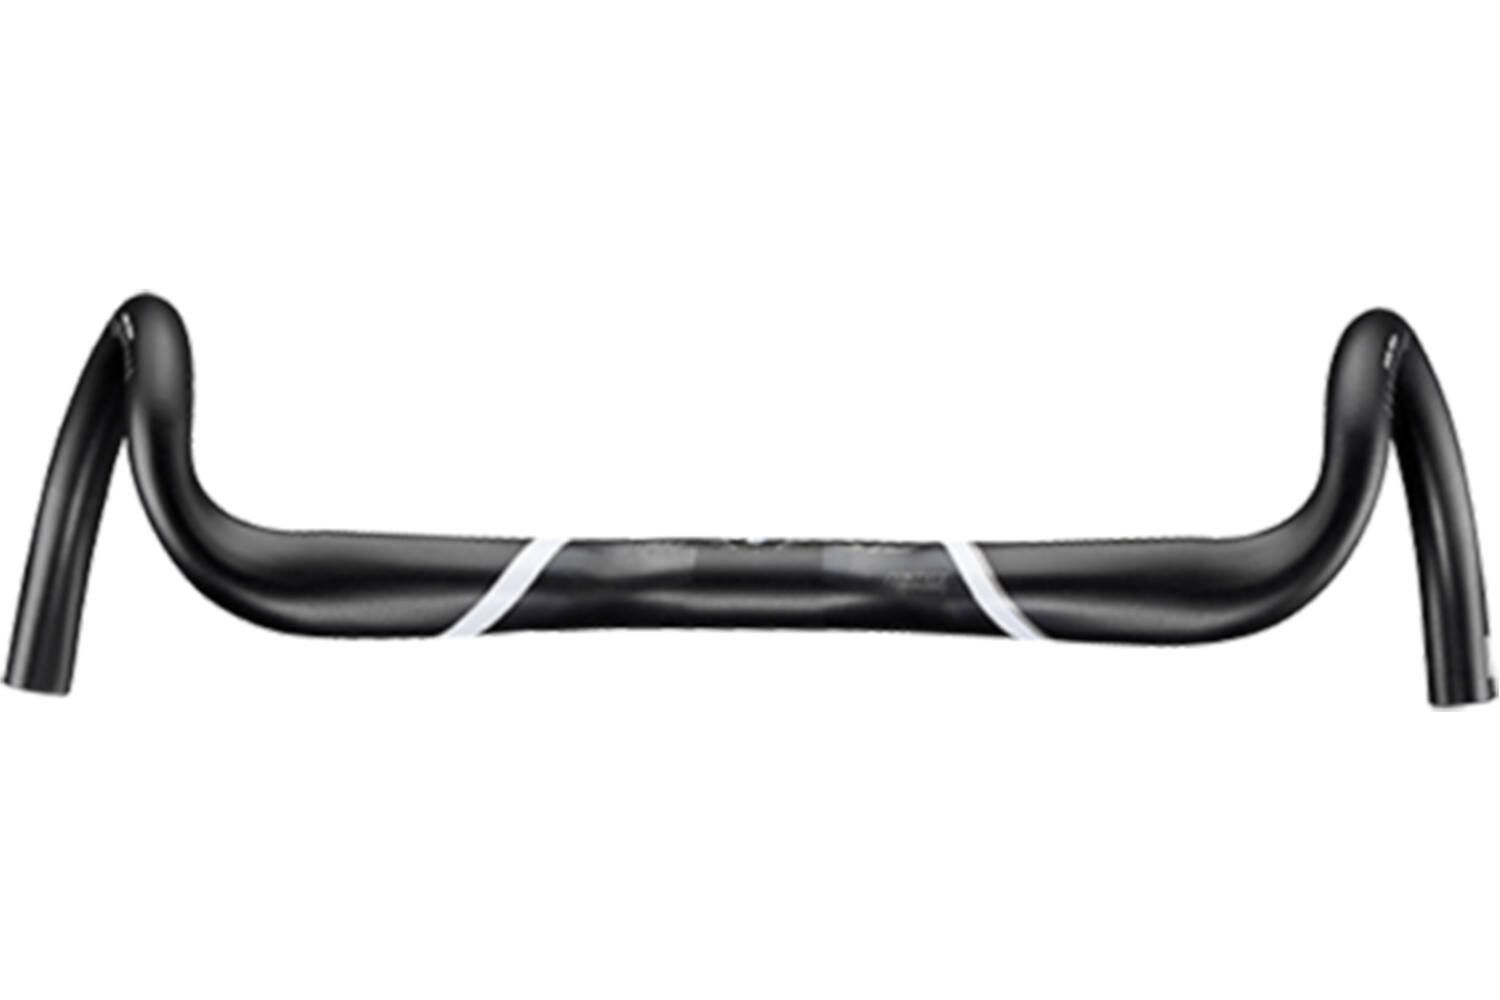 Control Tech One Road Compact 6061 Handlebar 31.8mm All Sizes 